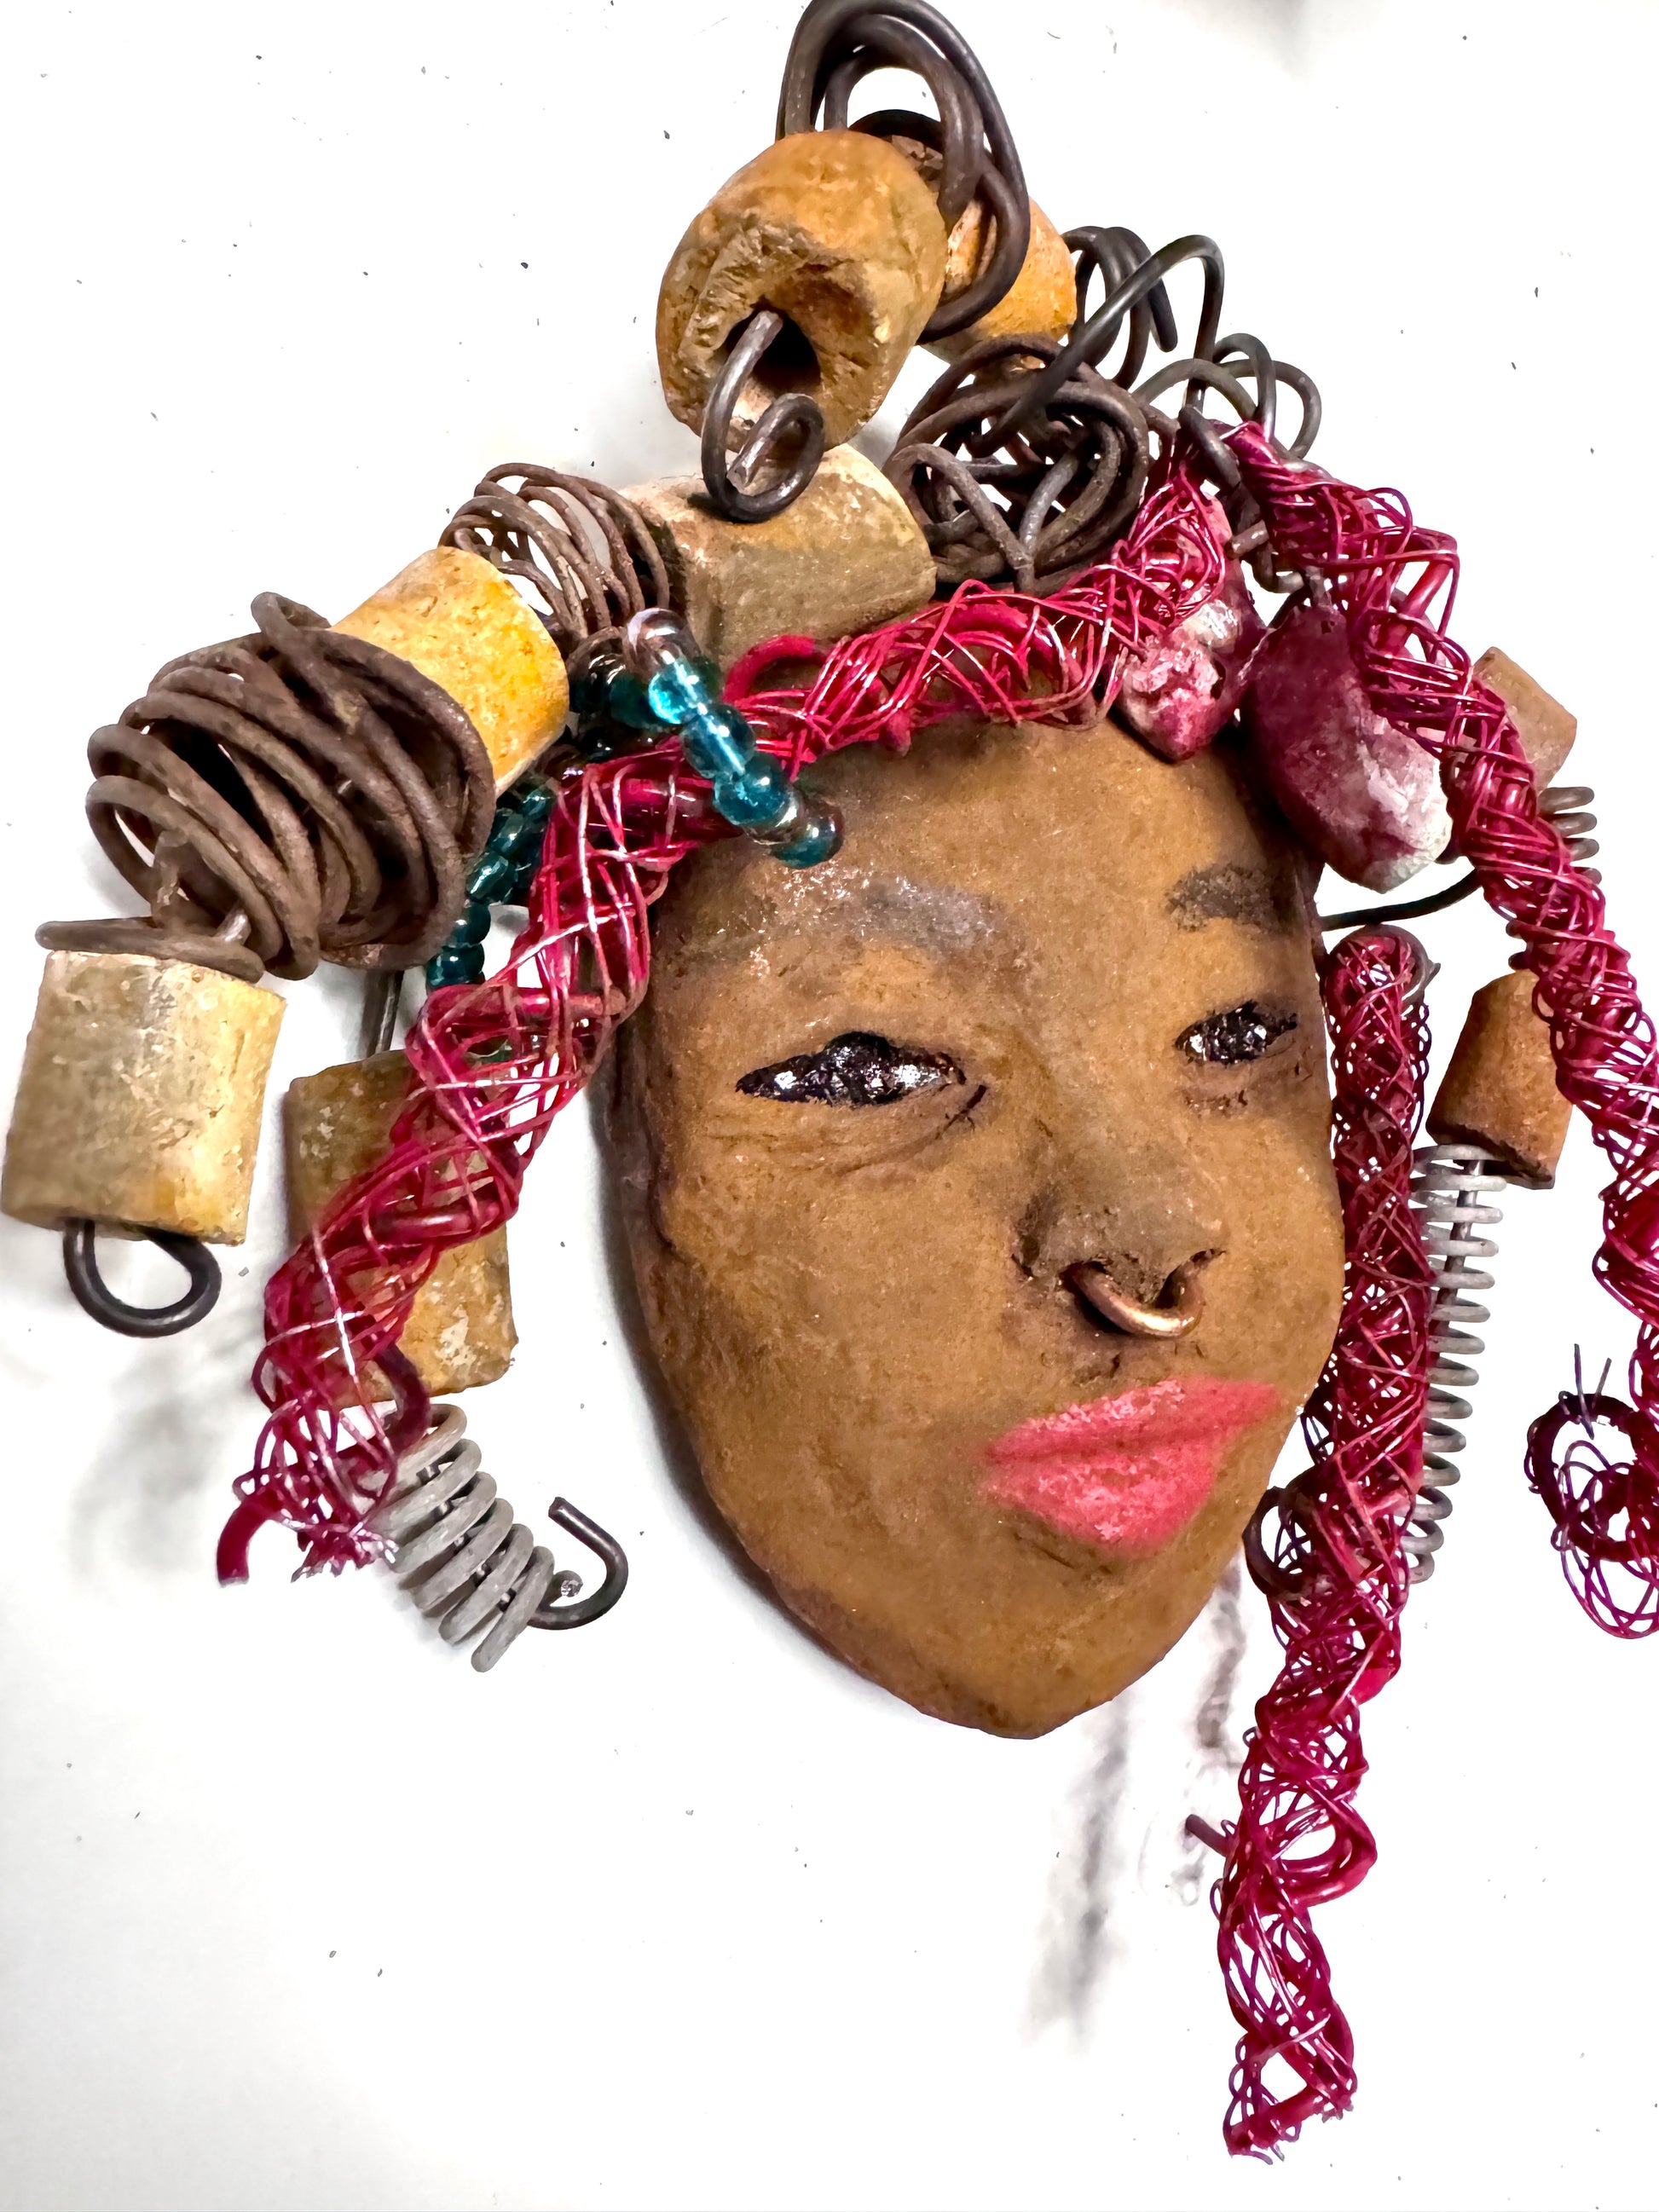 At 5" x 6" in size, Ola makes a stunning addition to walls, trees, and shadow boxes. His signature red braided hair is ornamented with handcrafted Raku beads, while his skin has a warm honey brown hue. Each piece is equipped with over 20 feet of top-notch 16 & 24-gauge wire in the hair. This fashionable sculpture will bring a modern flair to any room - simply place it in a shadow box and enjoy!  